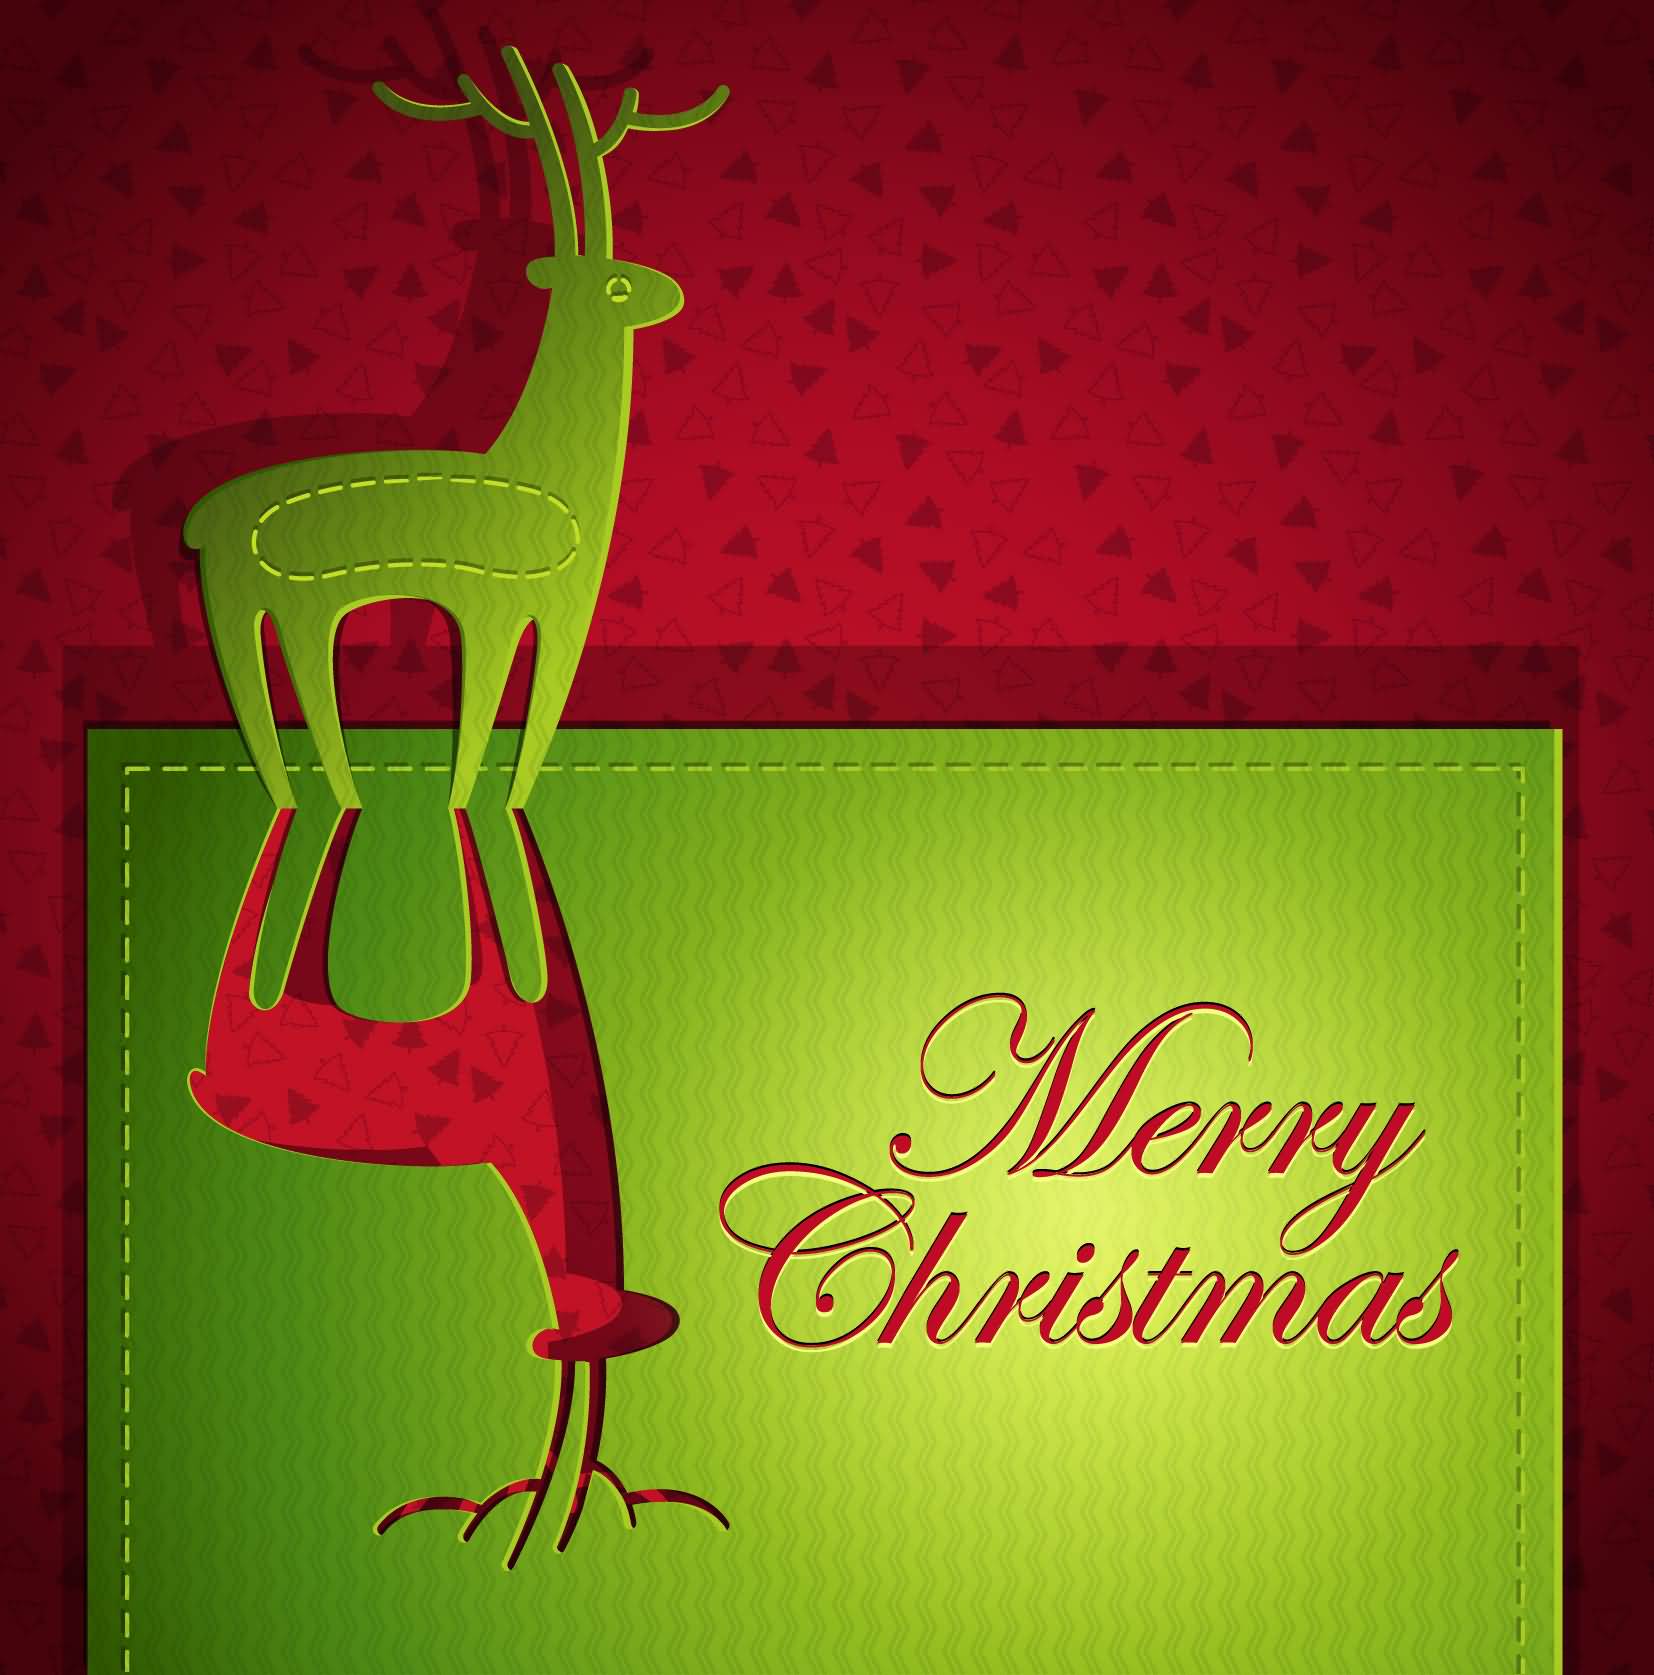 Christmas Cards Ideas Image Picture Photo Wallpaper 13